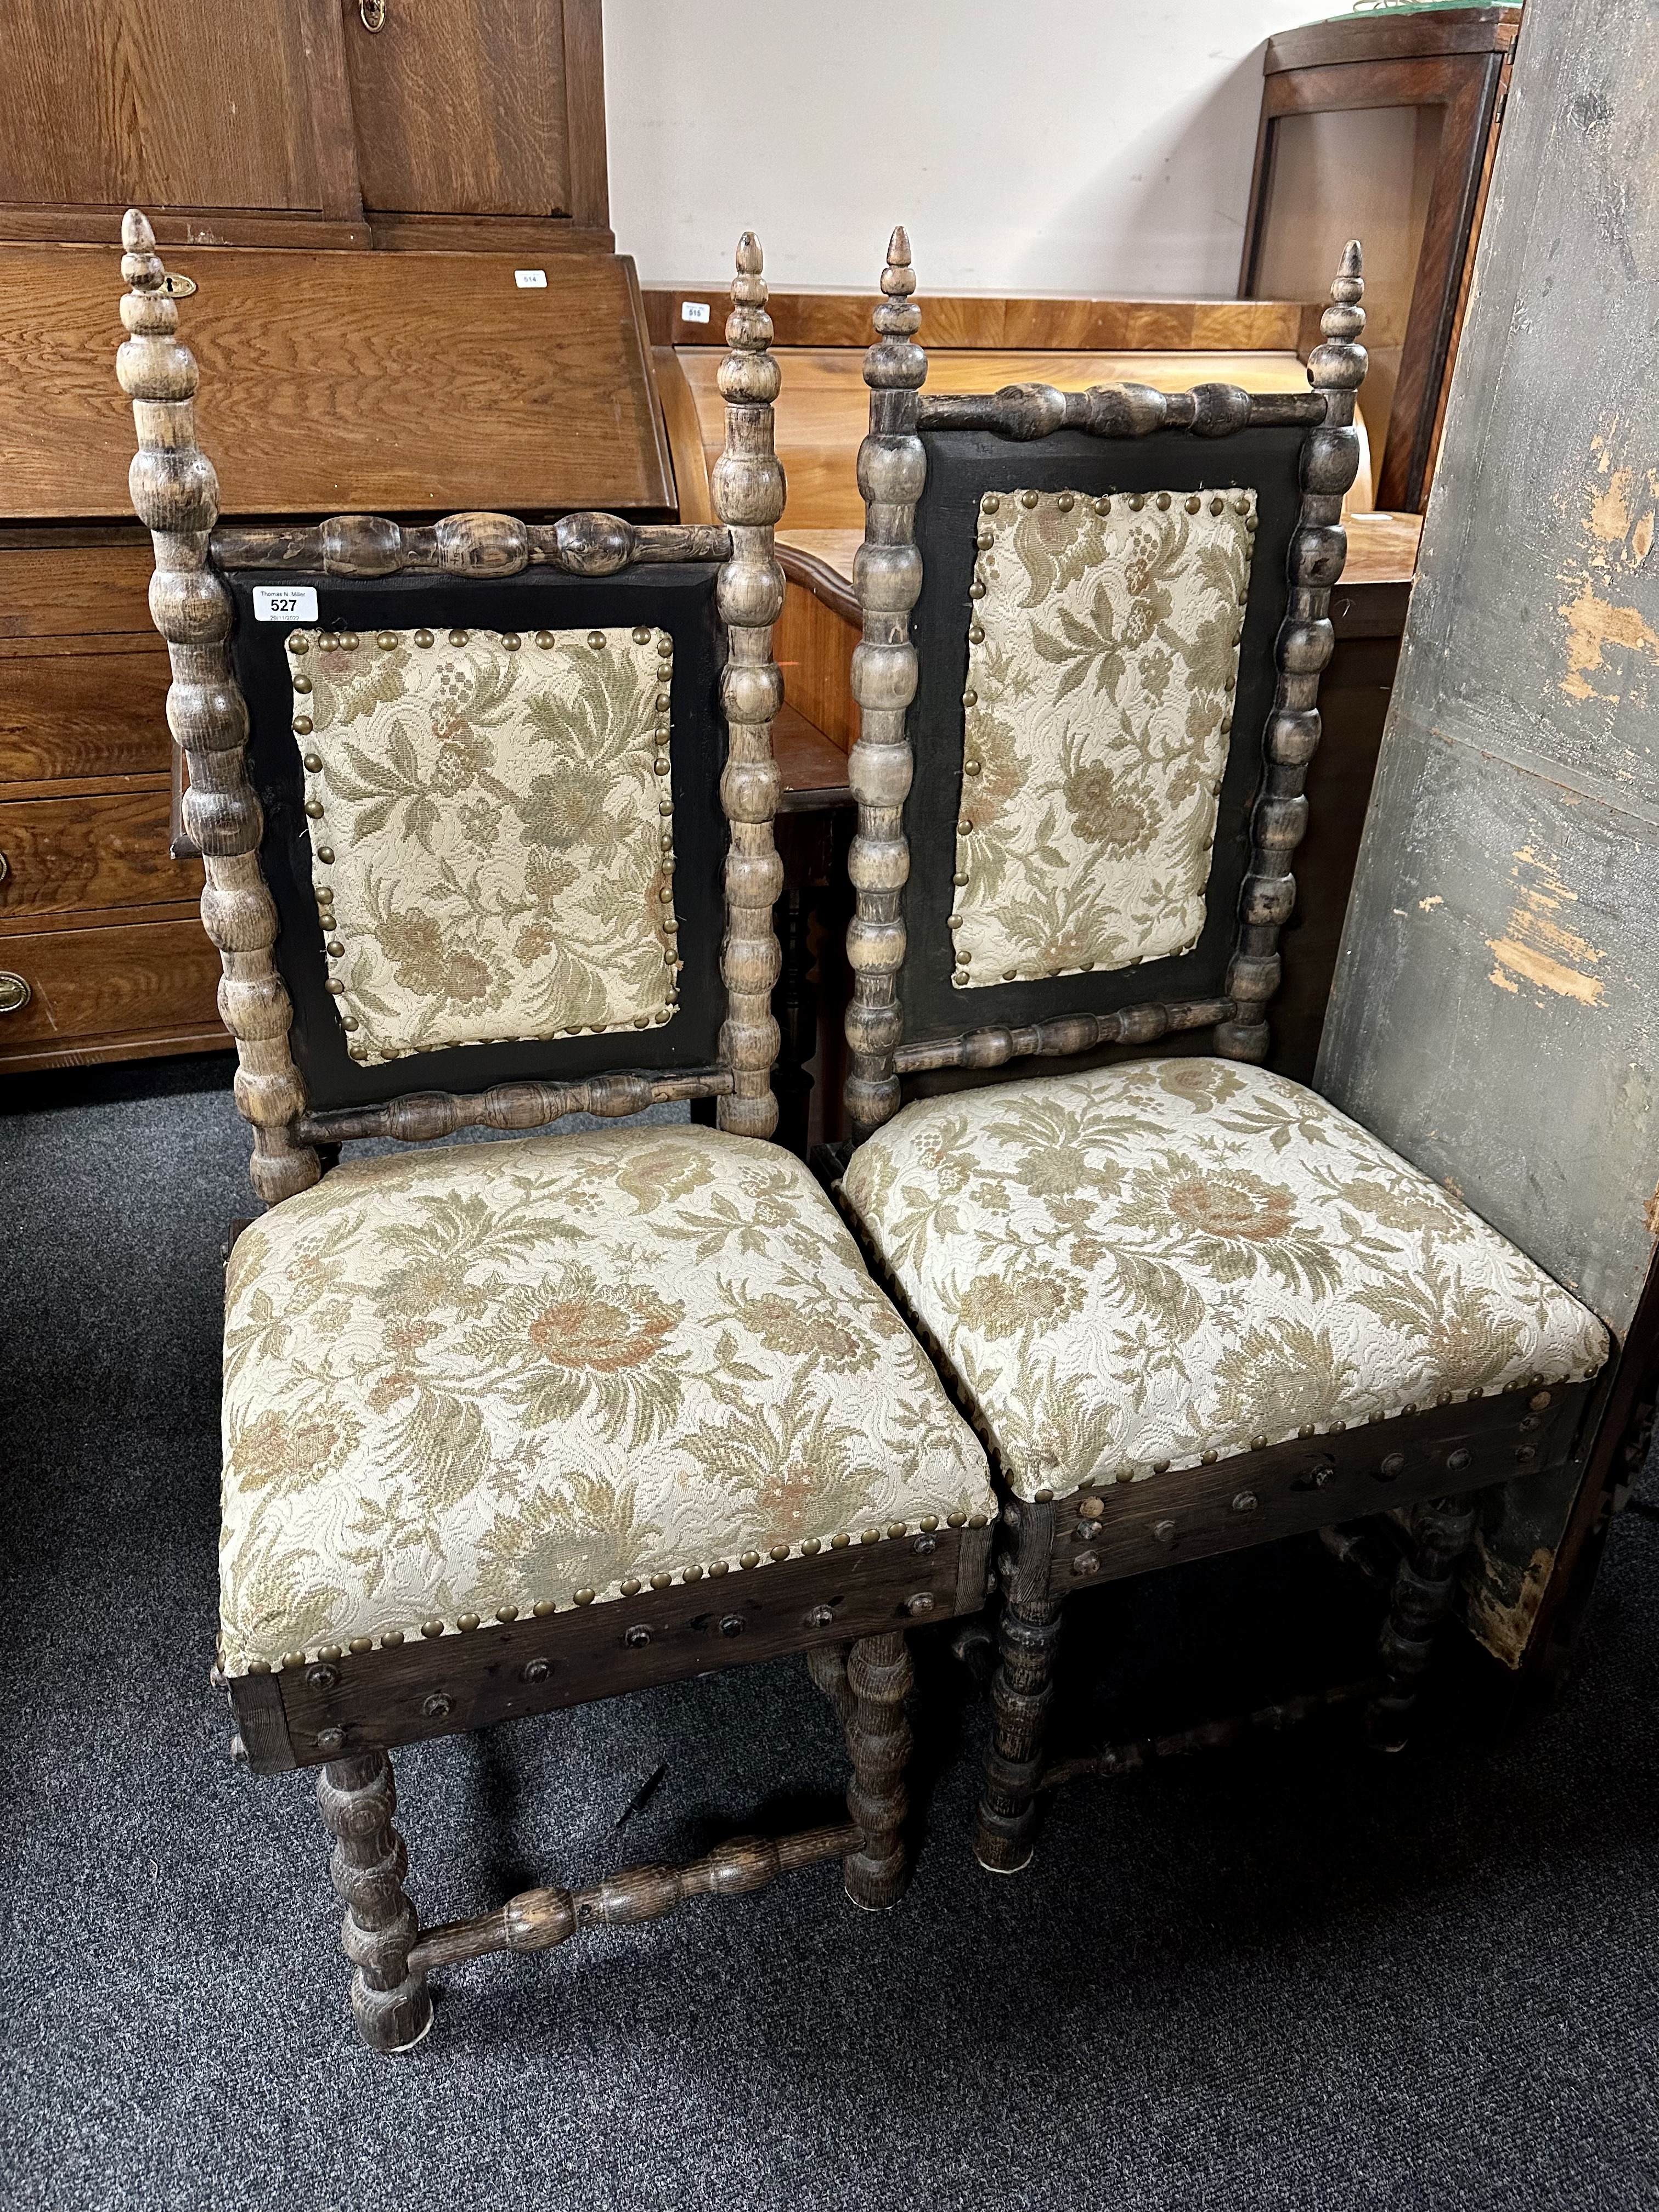 A pair of lady's and gent's bobbin-turned chairs upholstered in a floral fabric.